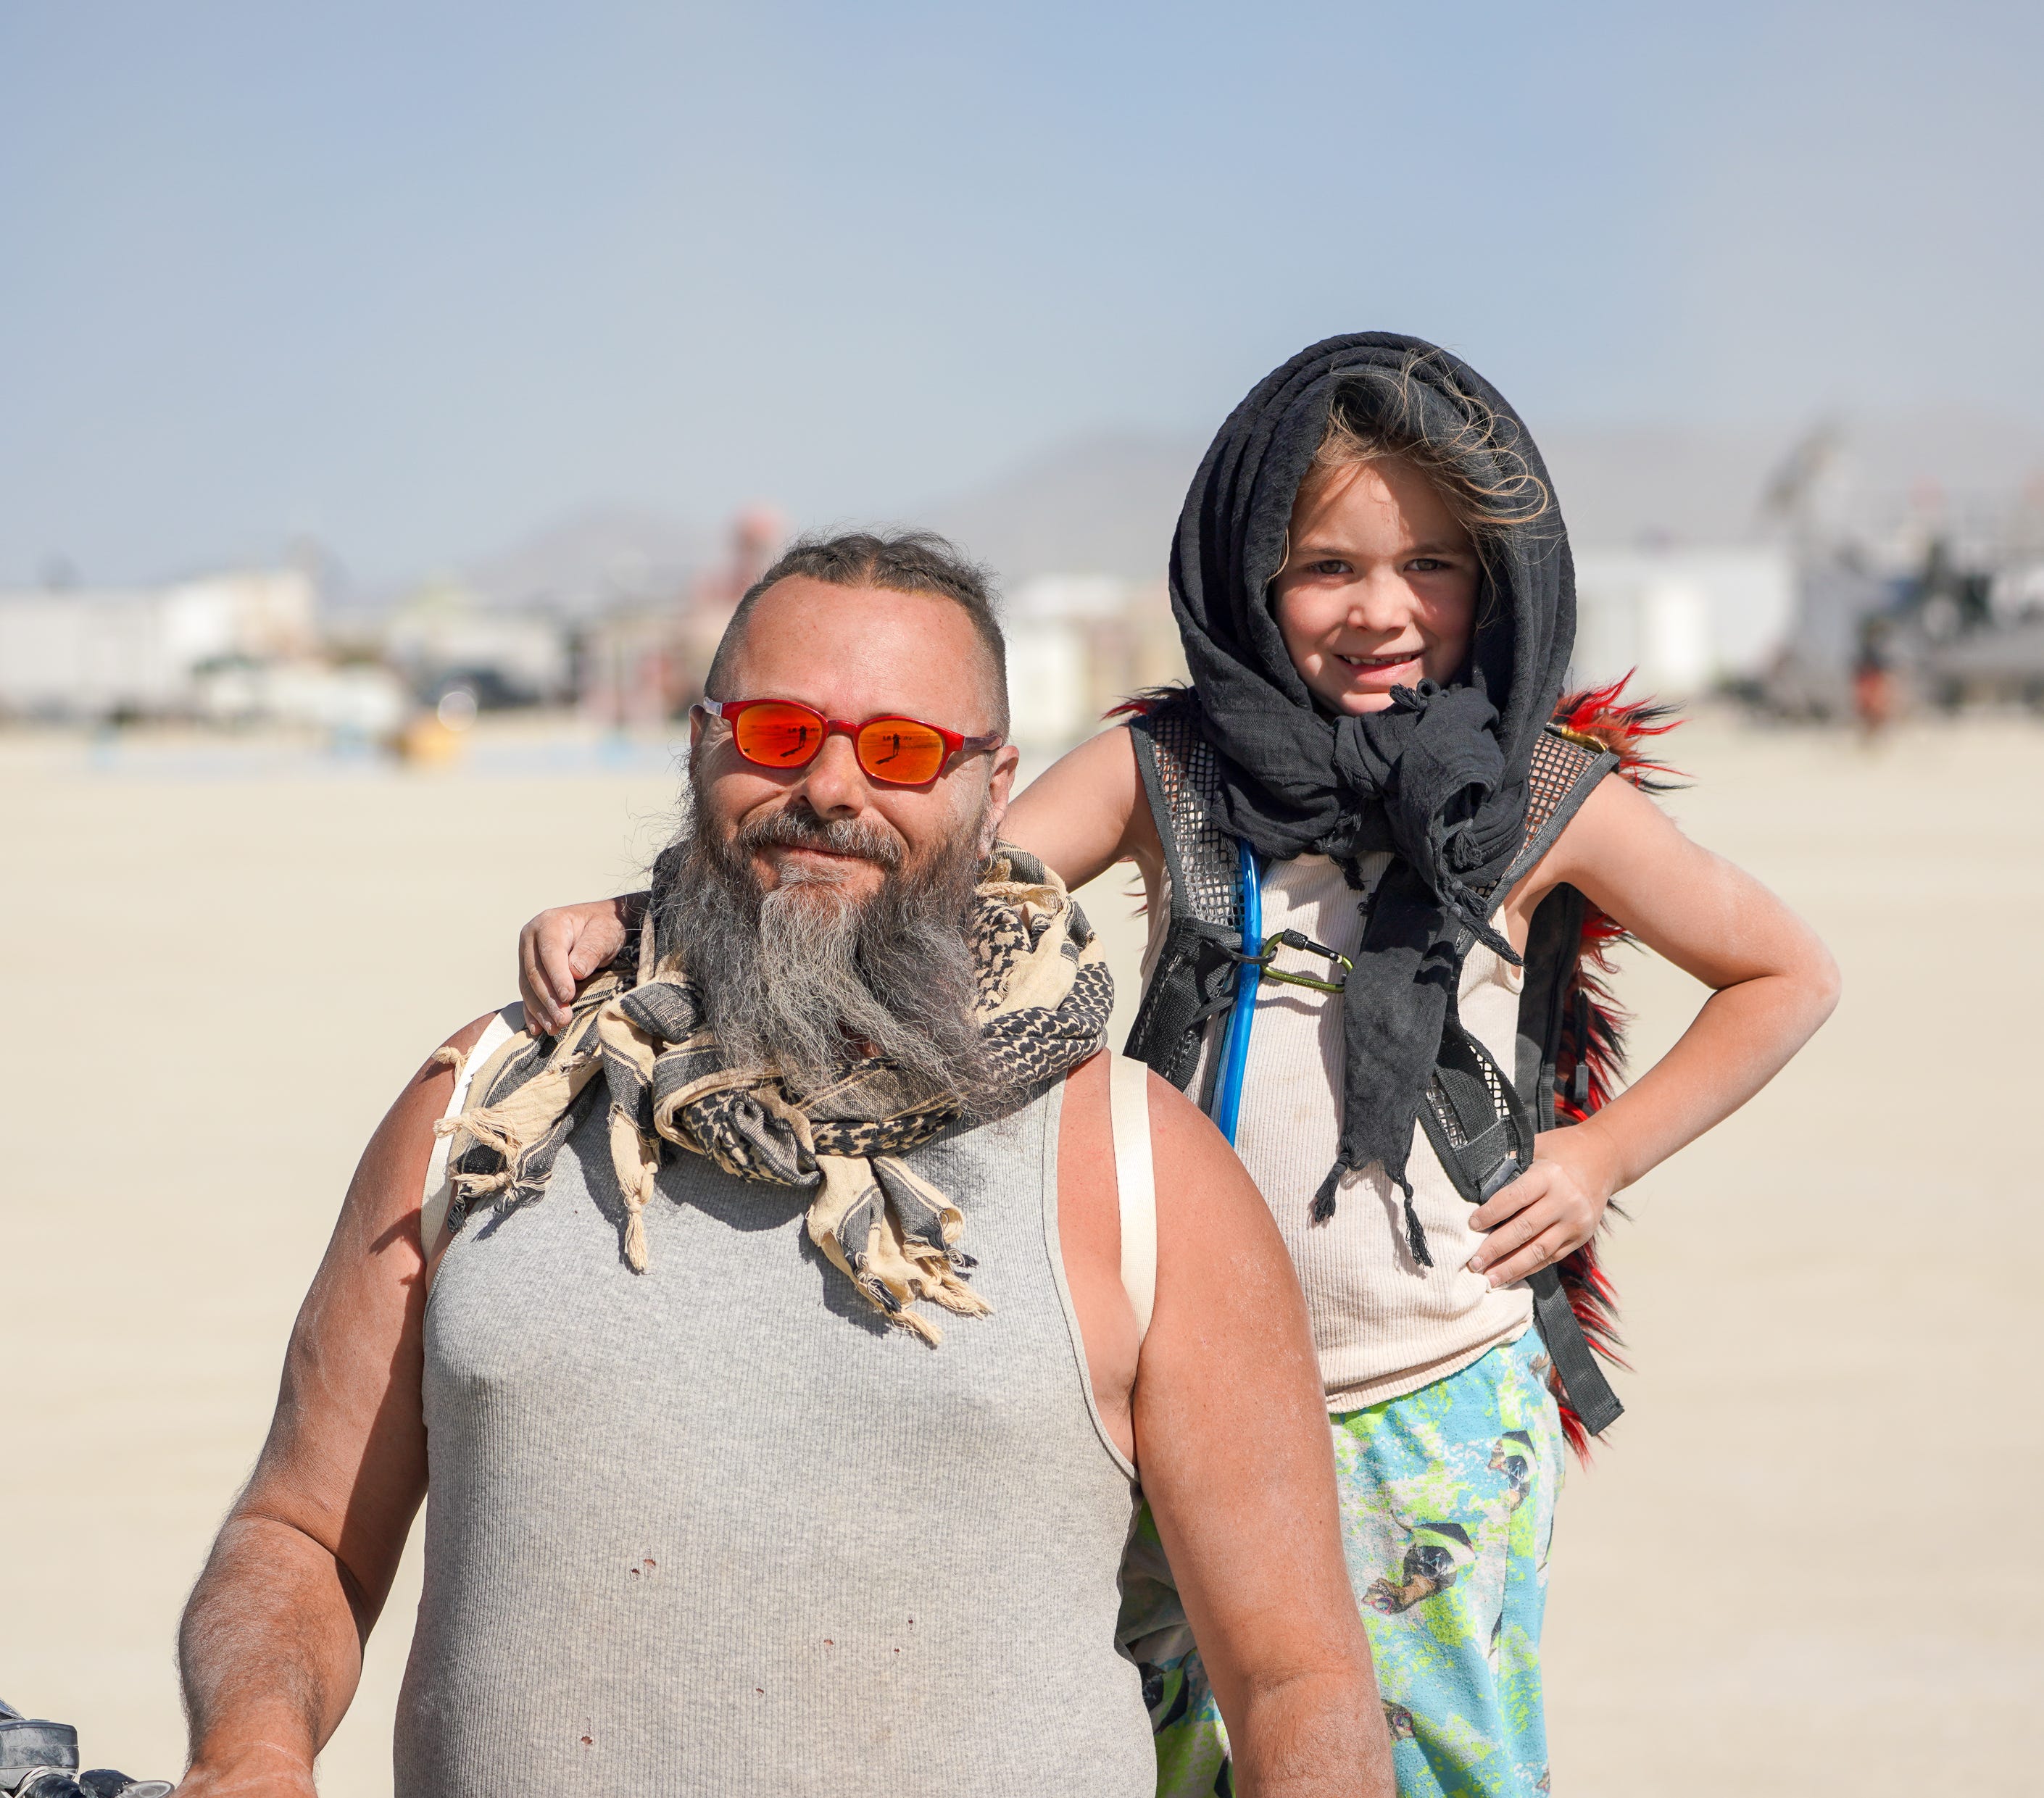 adam hentz recommends topless at burning man pic